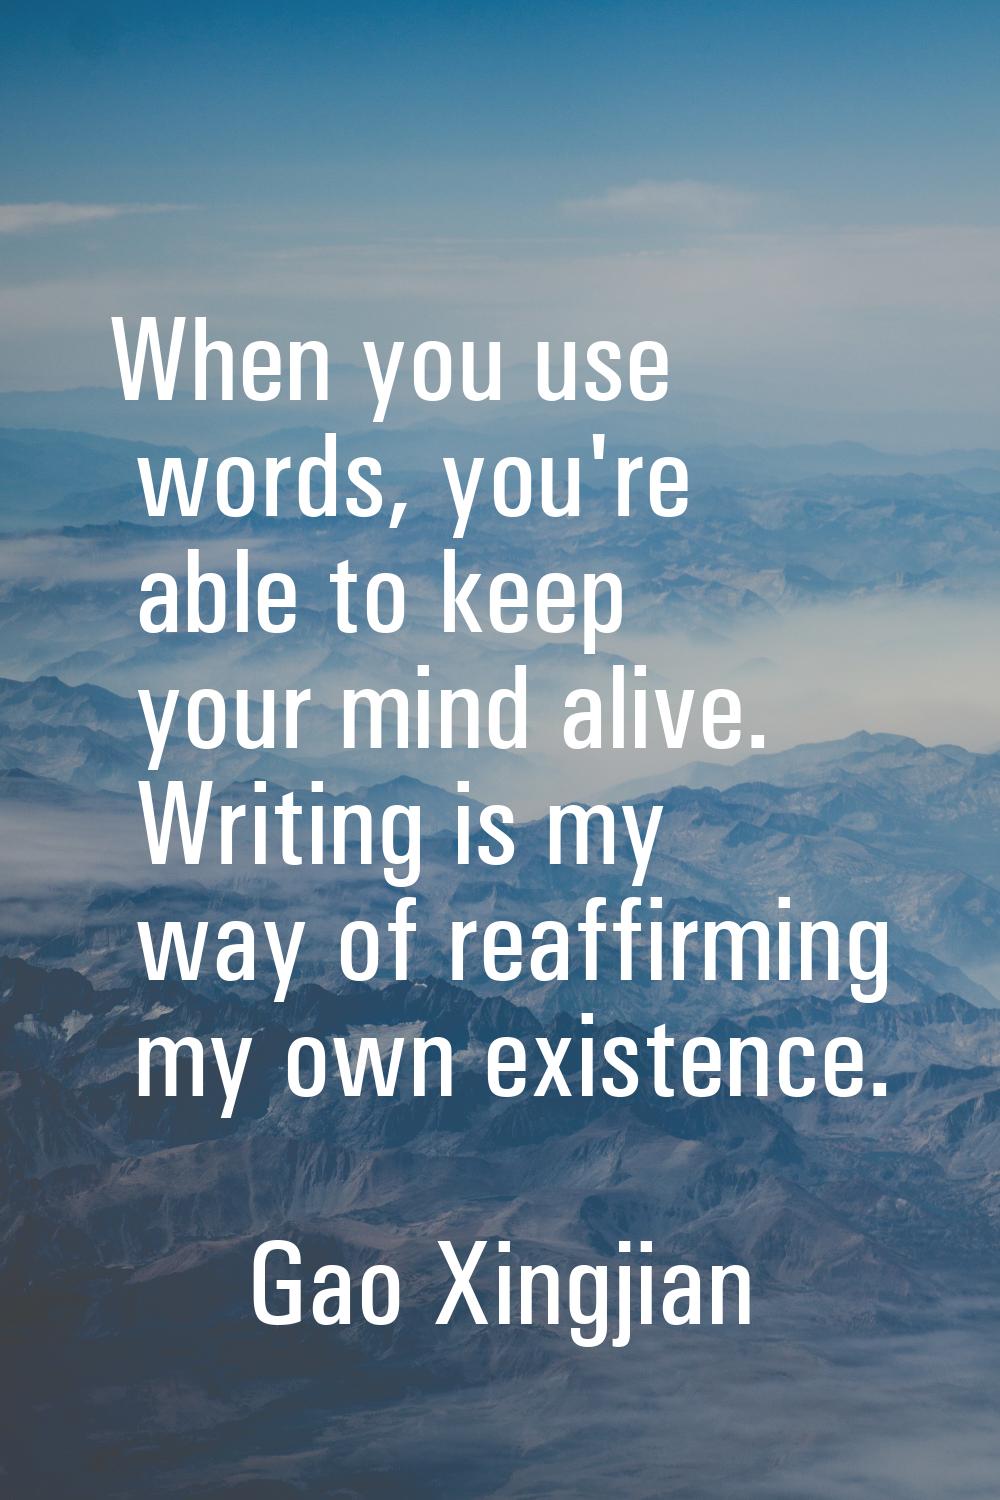 When you use words, you're able to keep your mind alive. Writing is my way of reaffirming my own ex